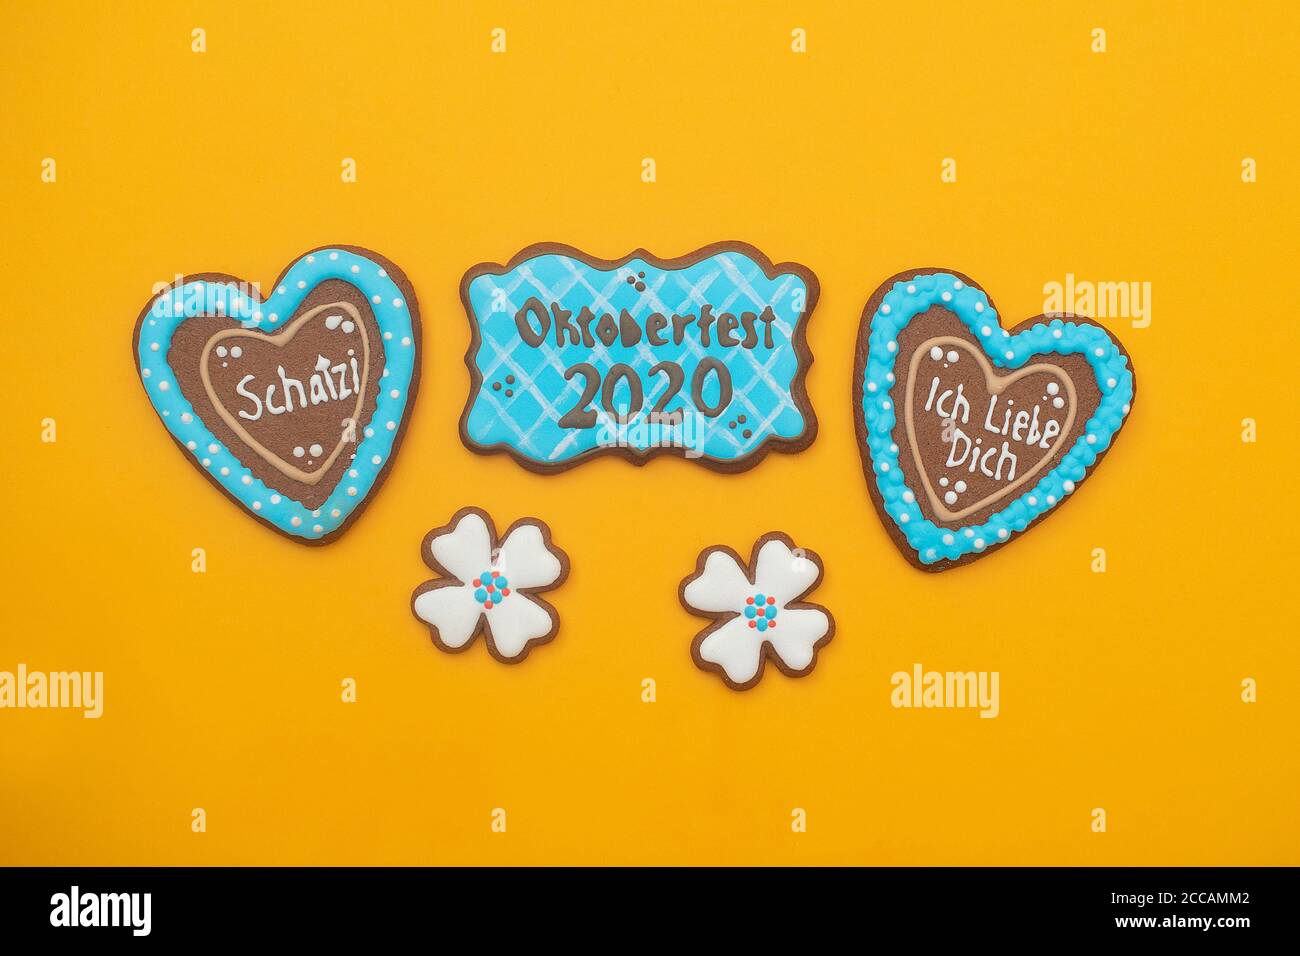 Oktoberfest Festival. Sweet gingerbread with the attributes of a German holiday. Munich, Bavaria, Germany Stock Photo